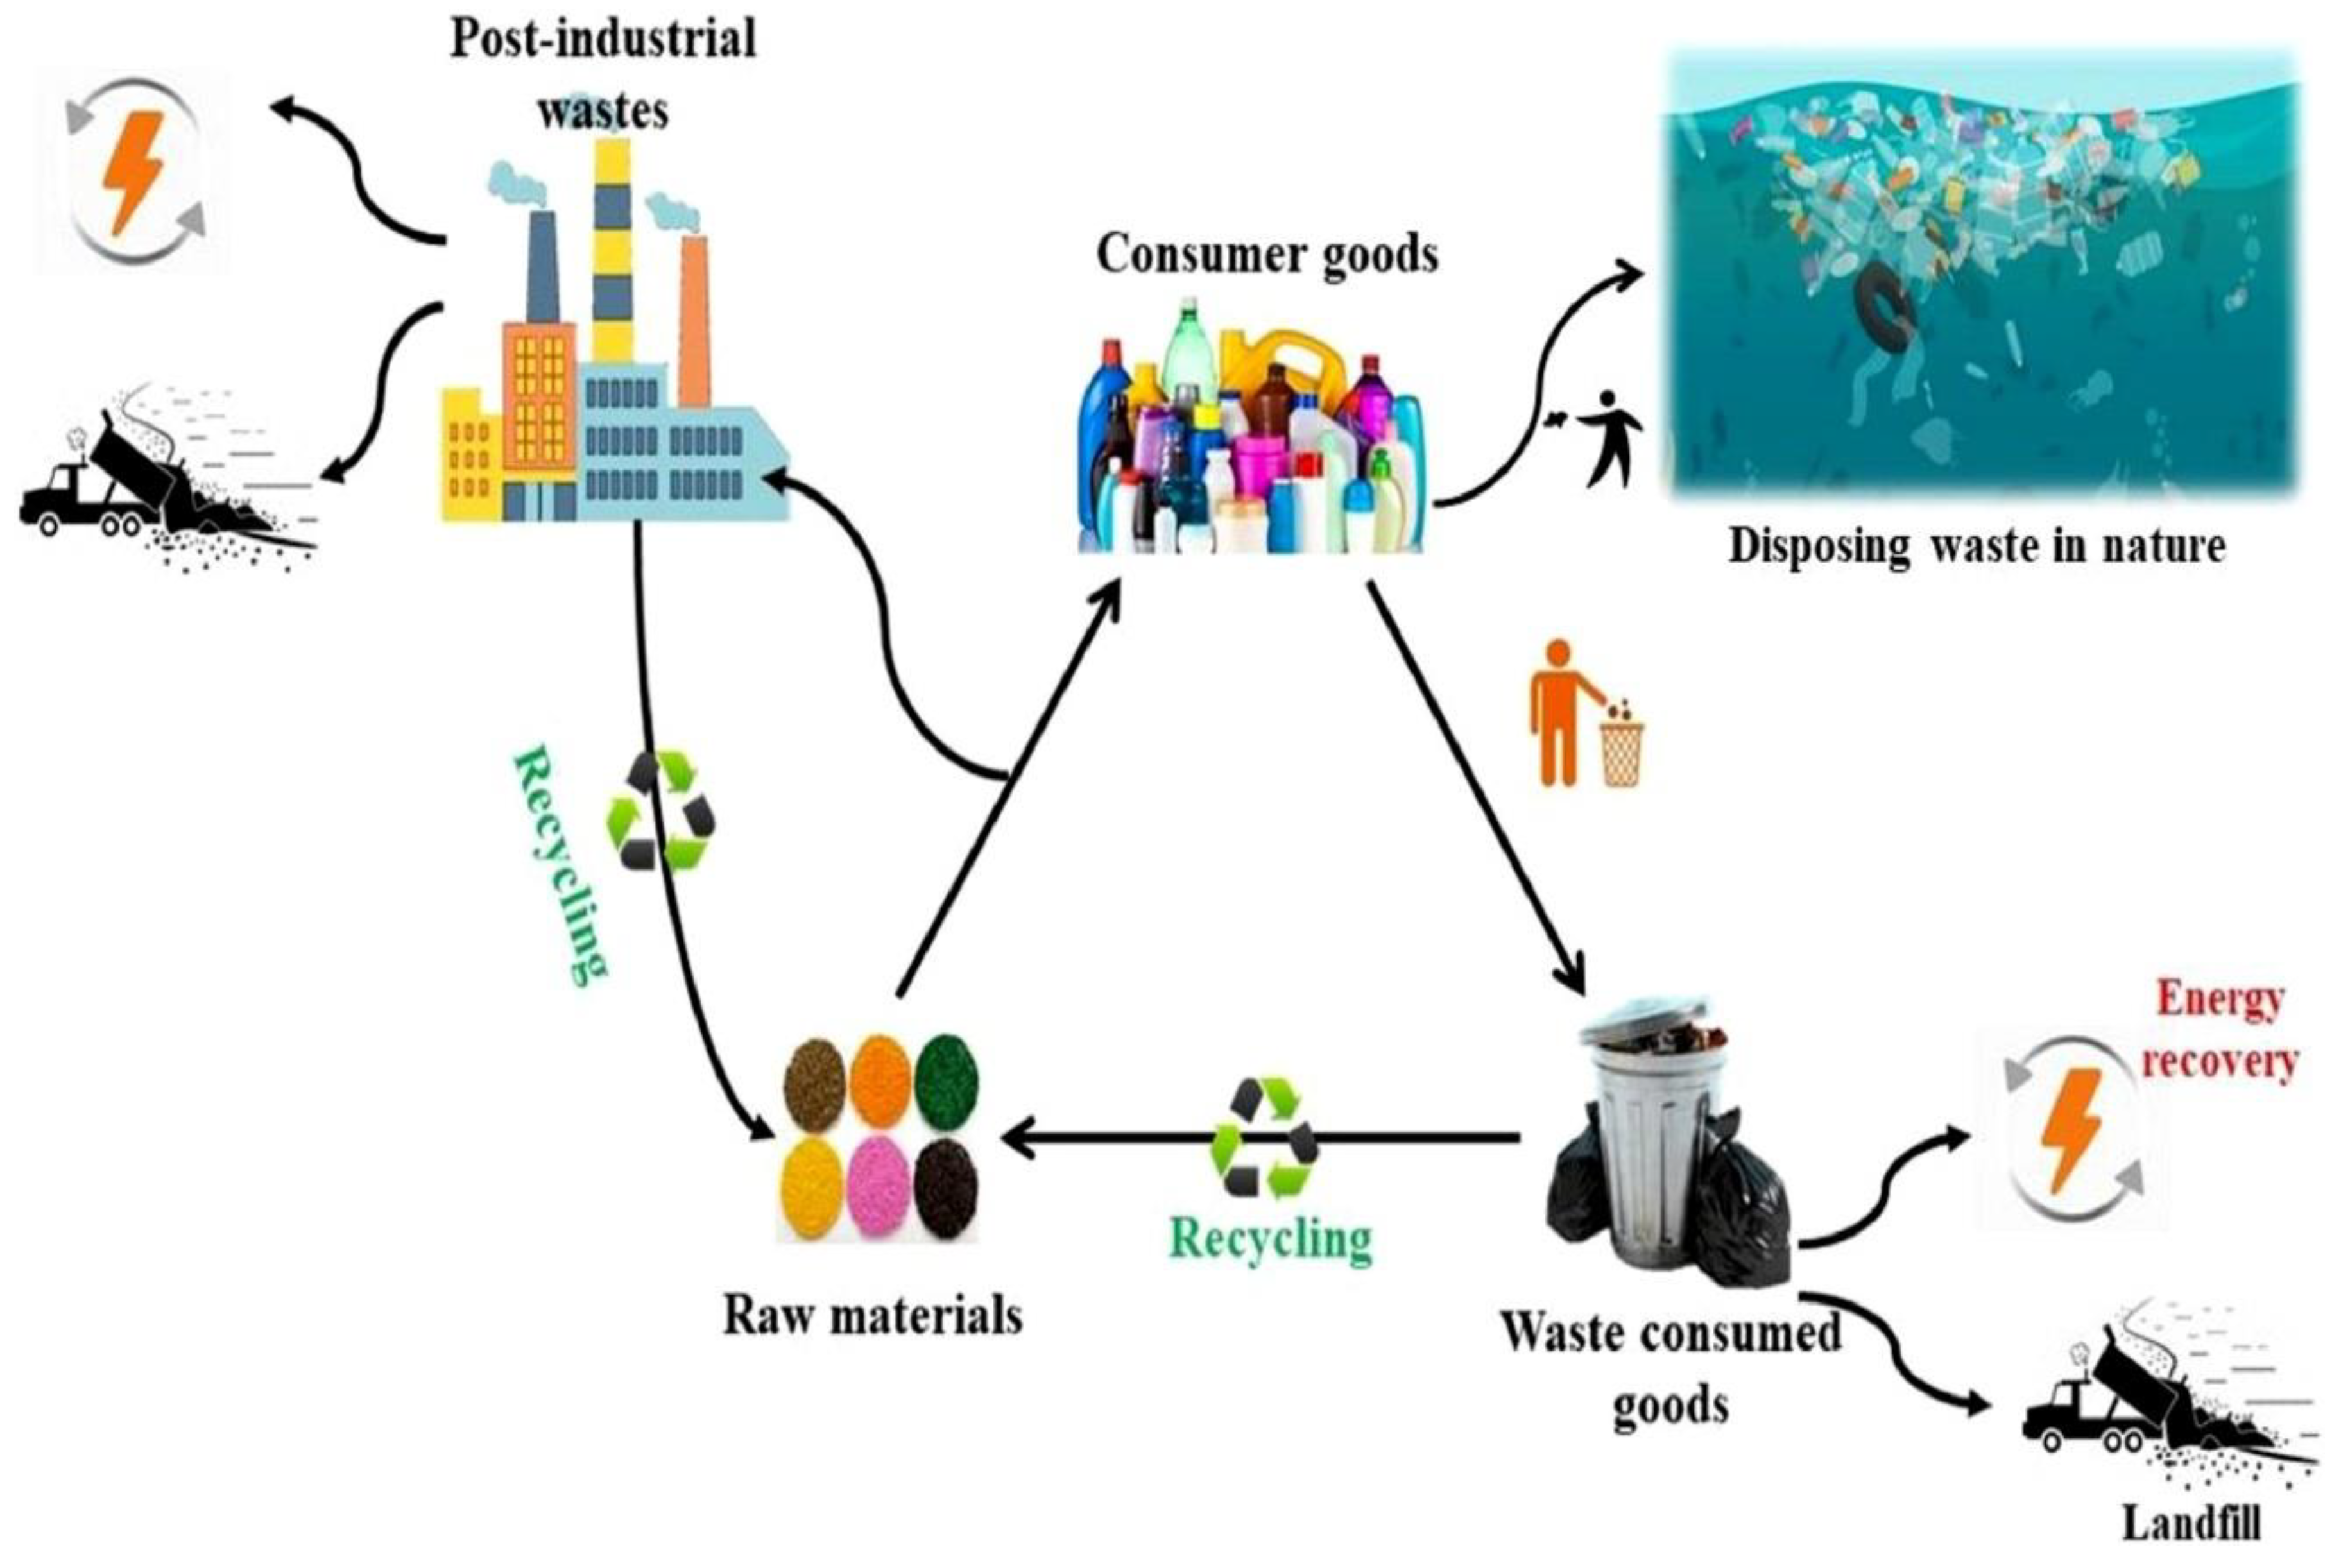 File:Waste recycling plant - materials recovery facility icon.png